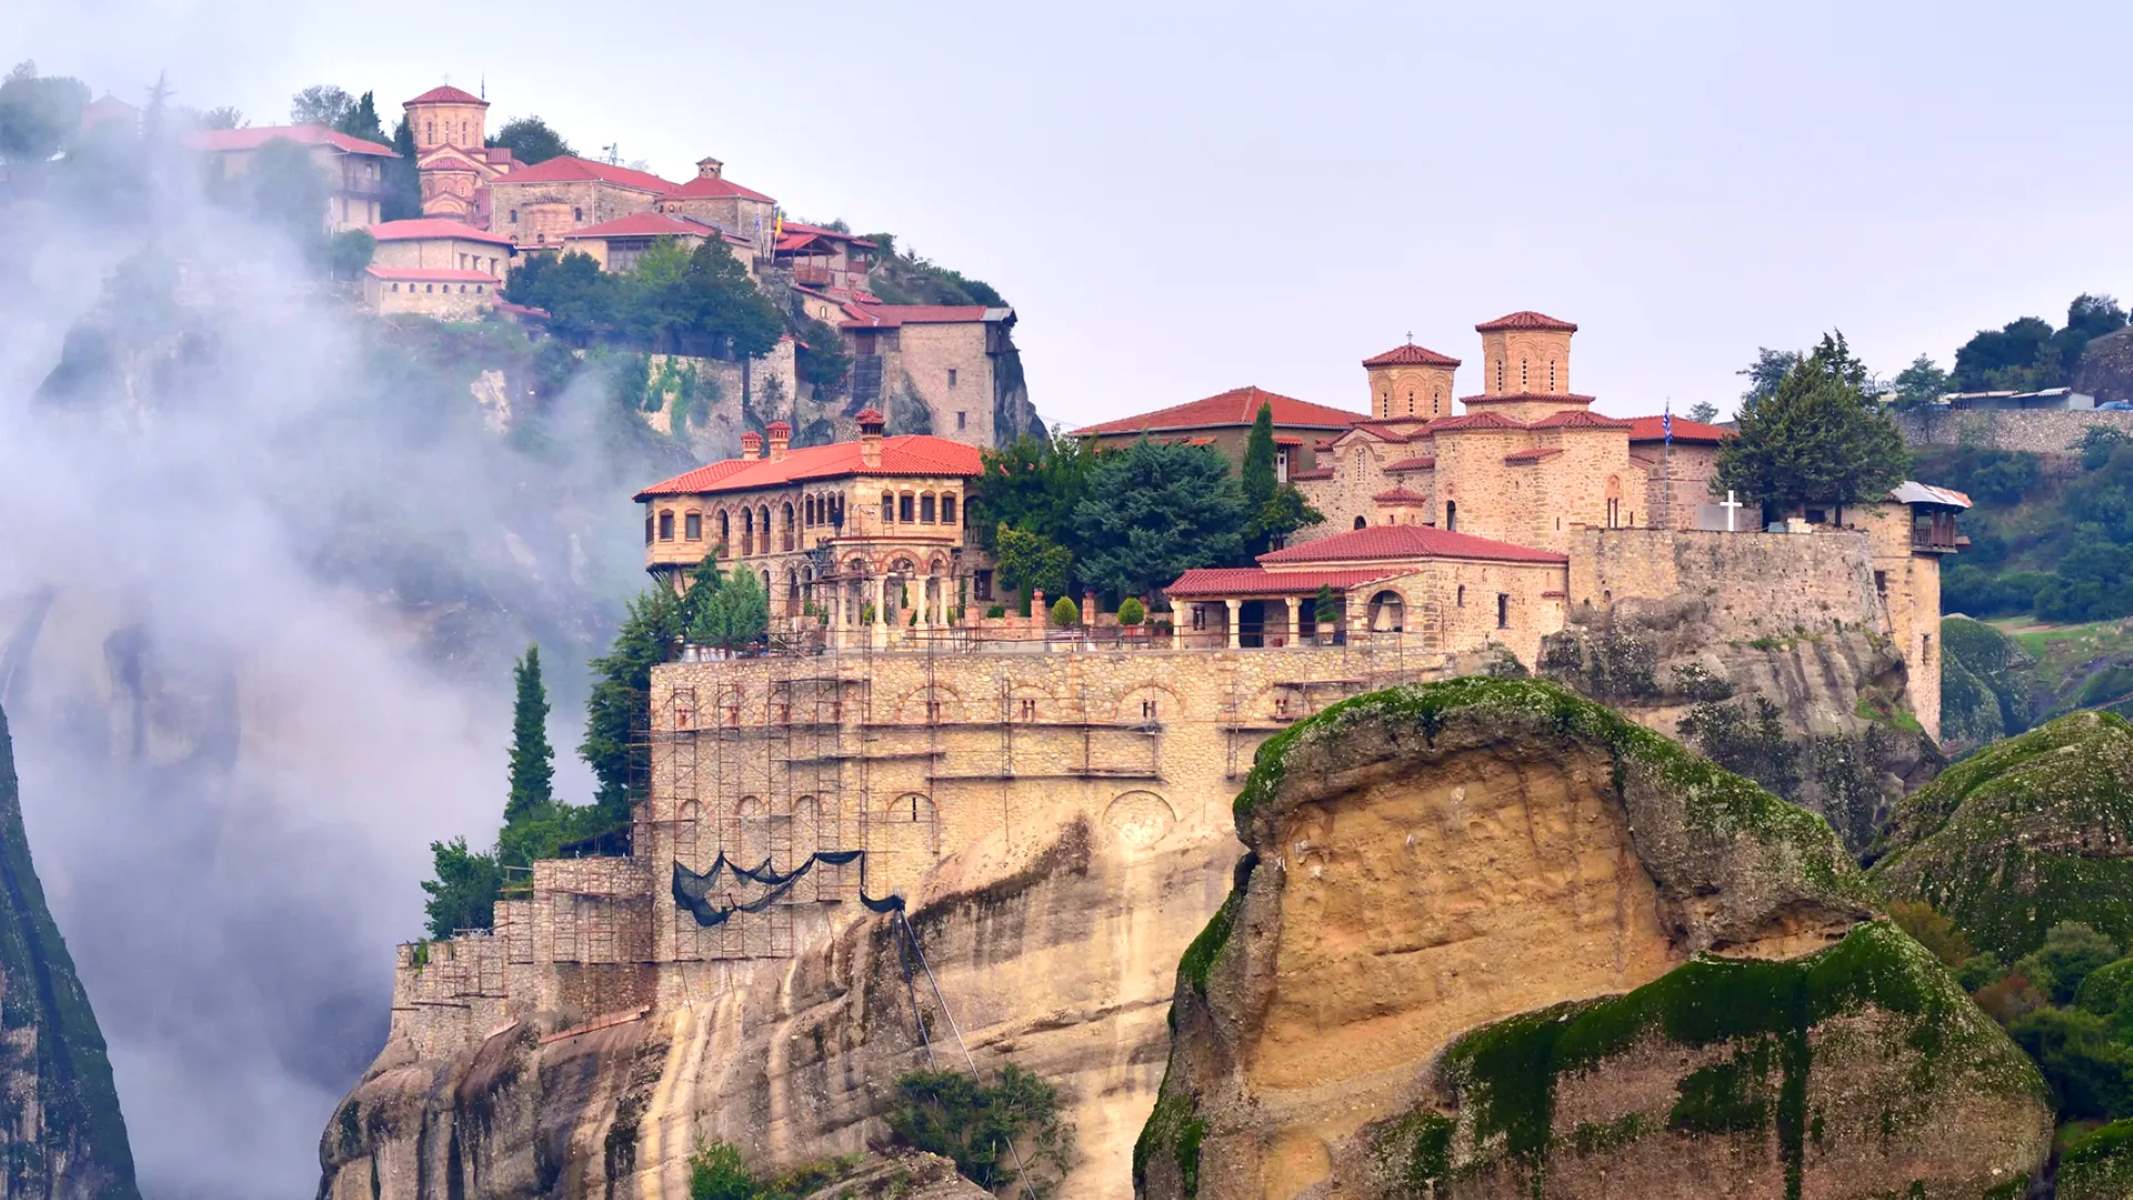 20 Fascinating Facts About Meteora Monasteries - Facts.net